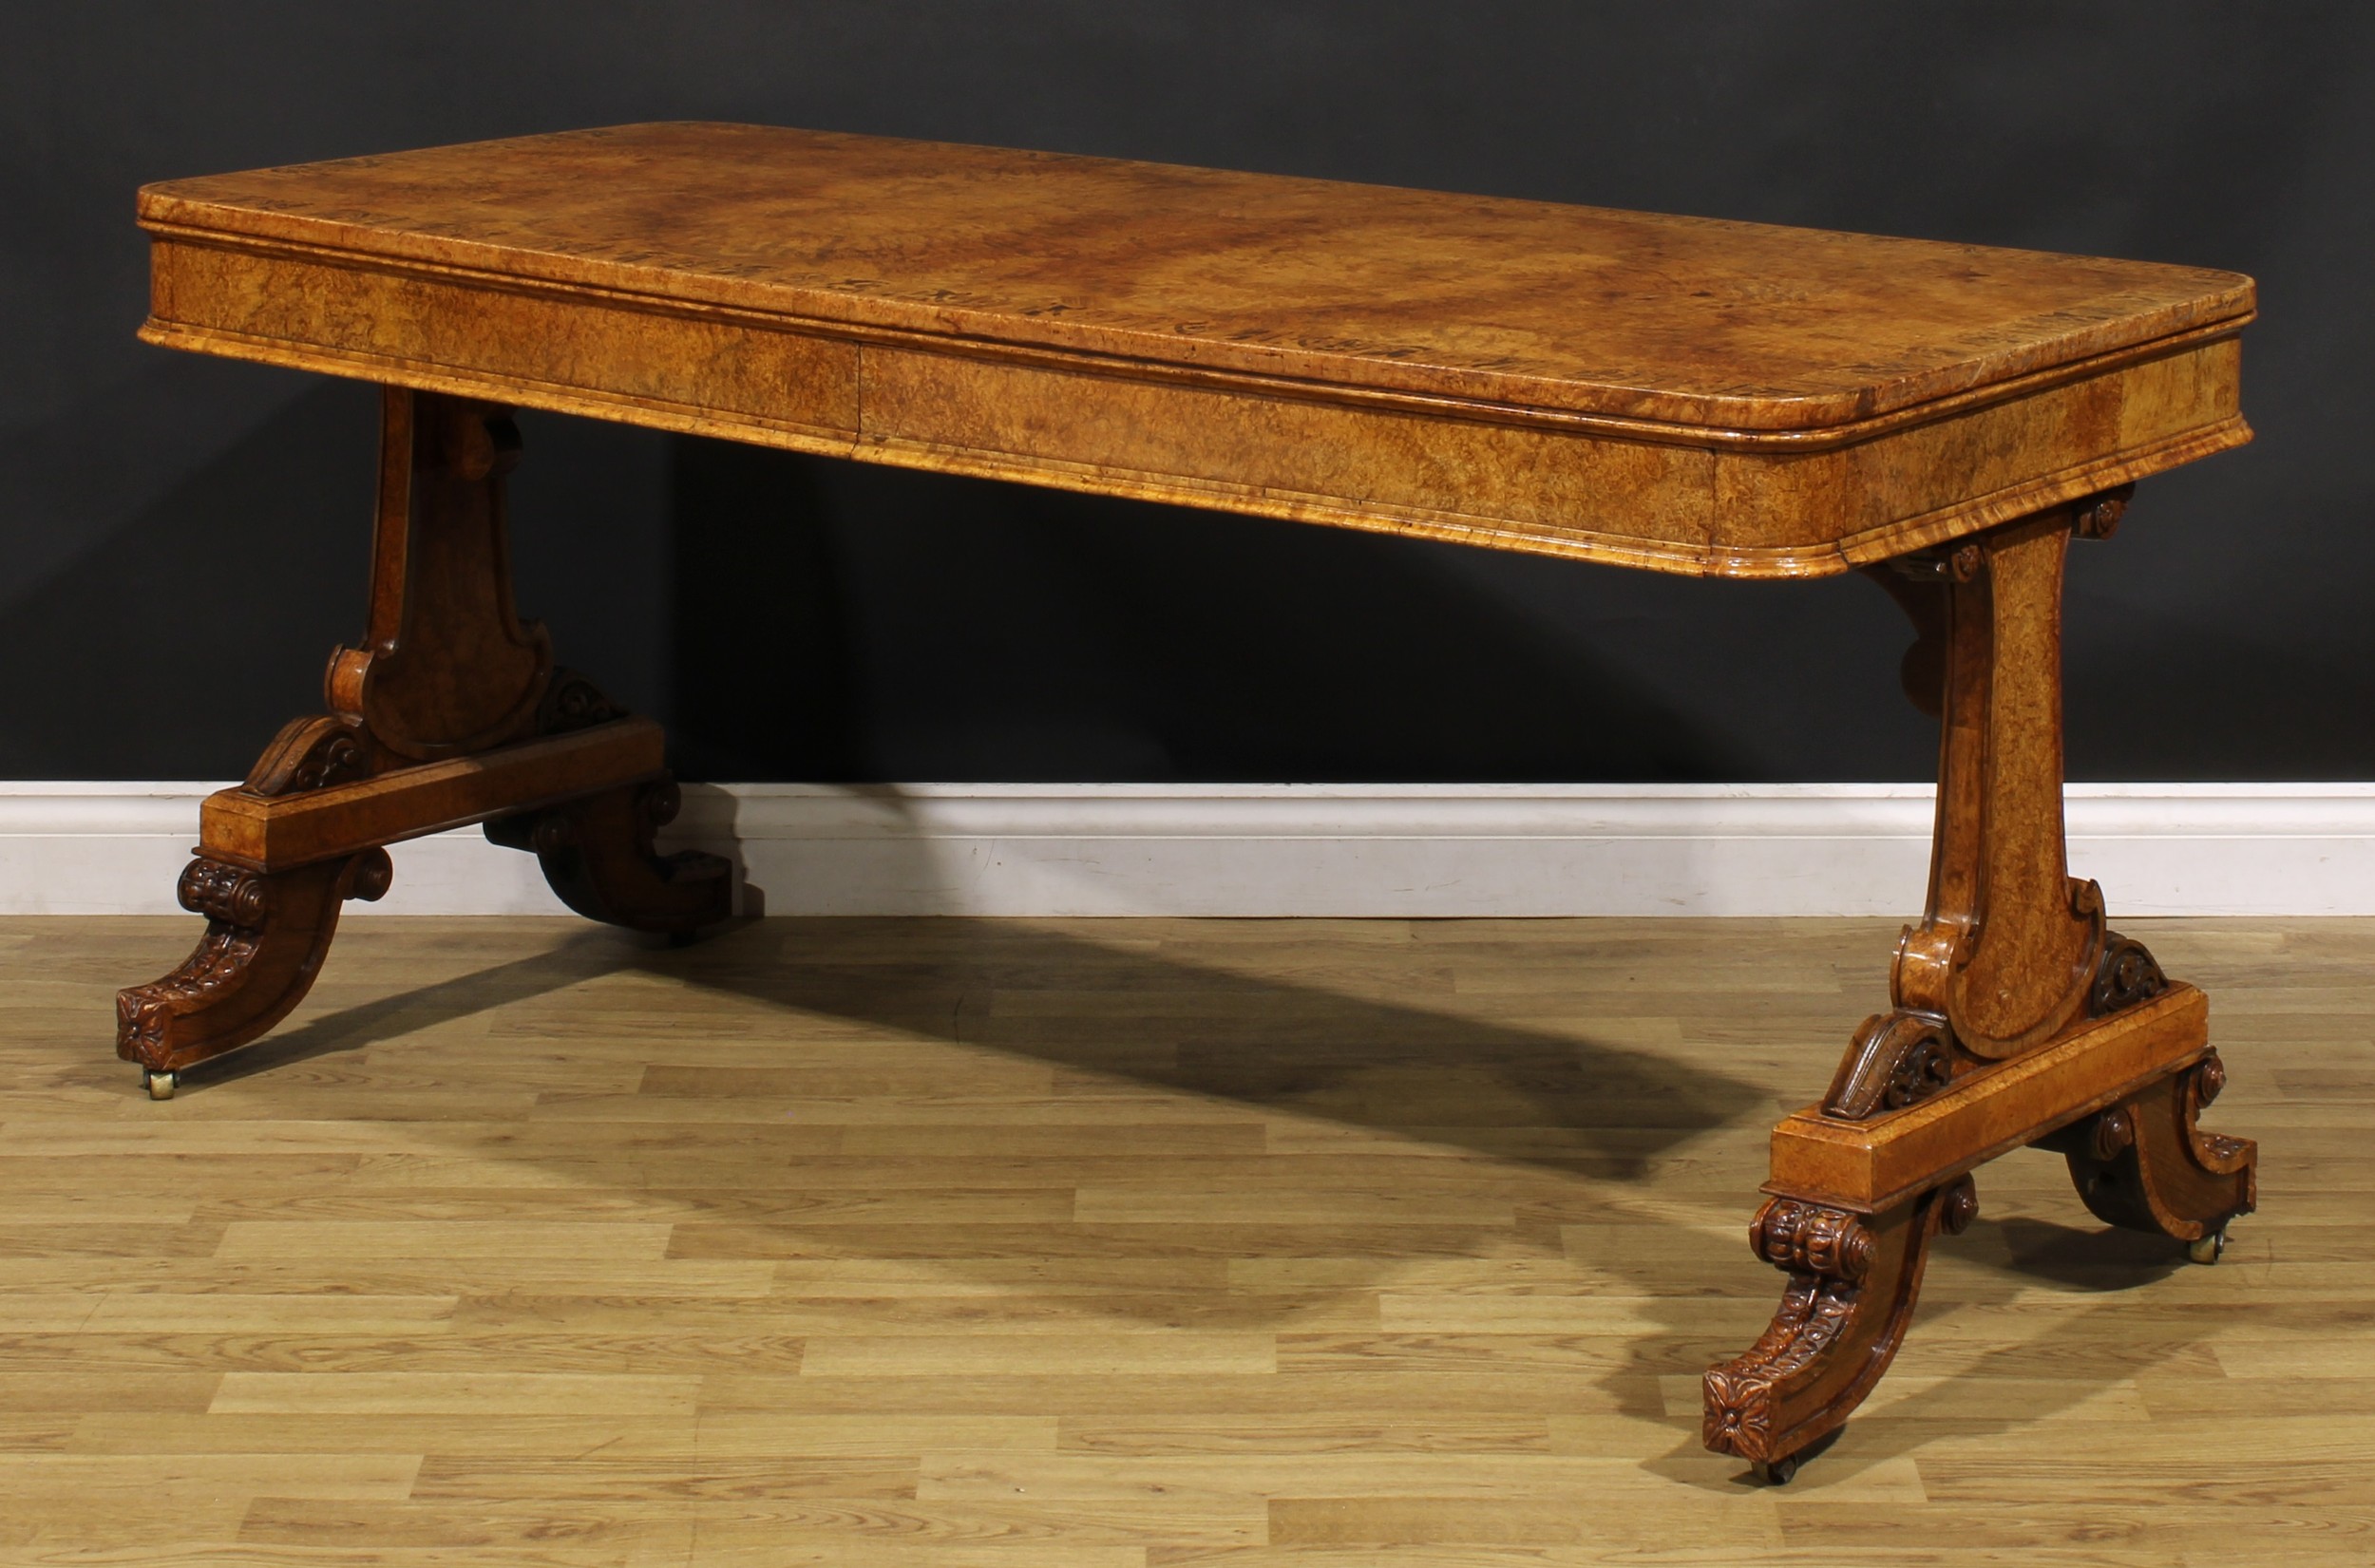 A William IV burr walnut and zebrawood marquetry library table, in the manner of George Bullock, - Image 5 of 6